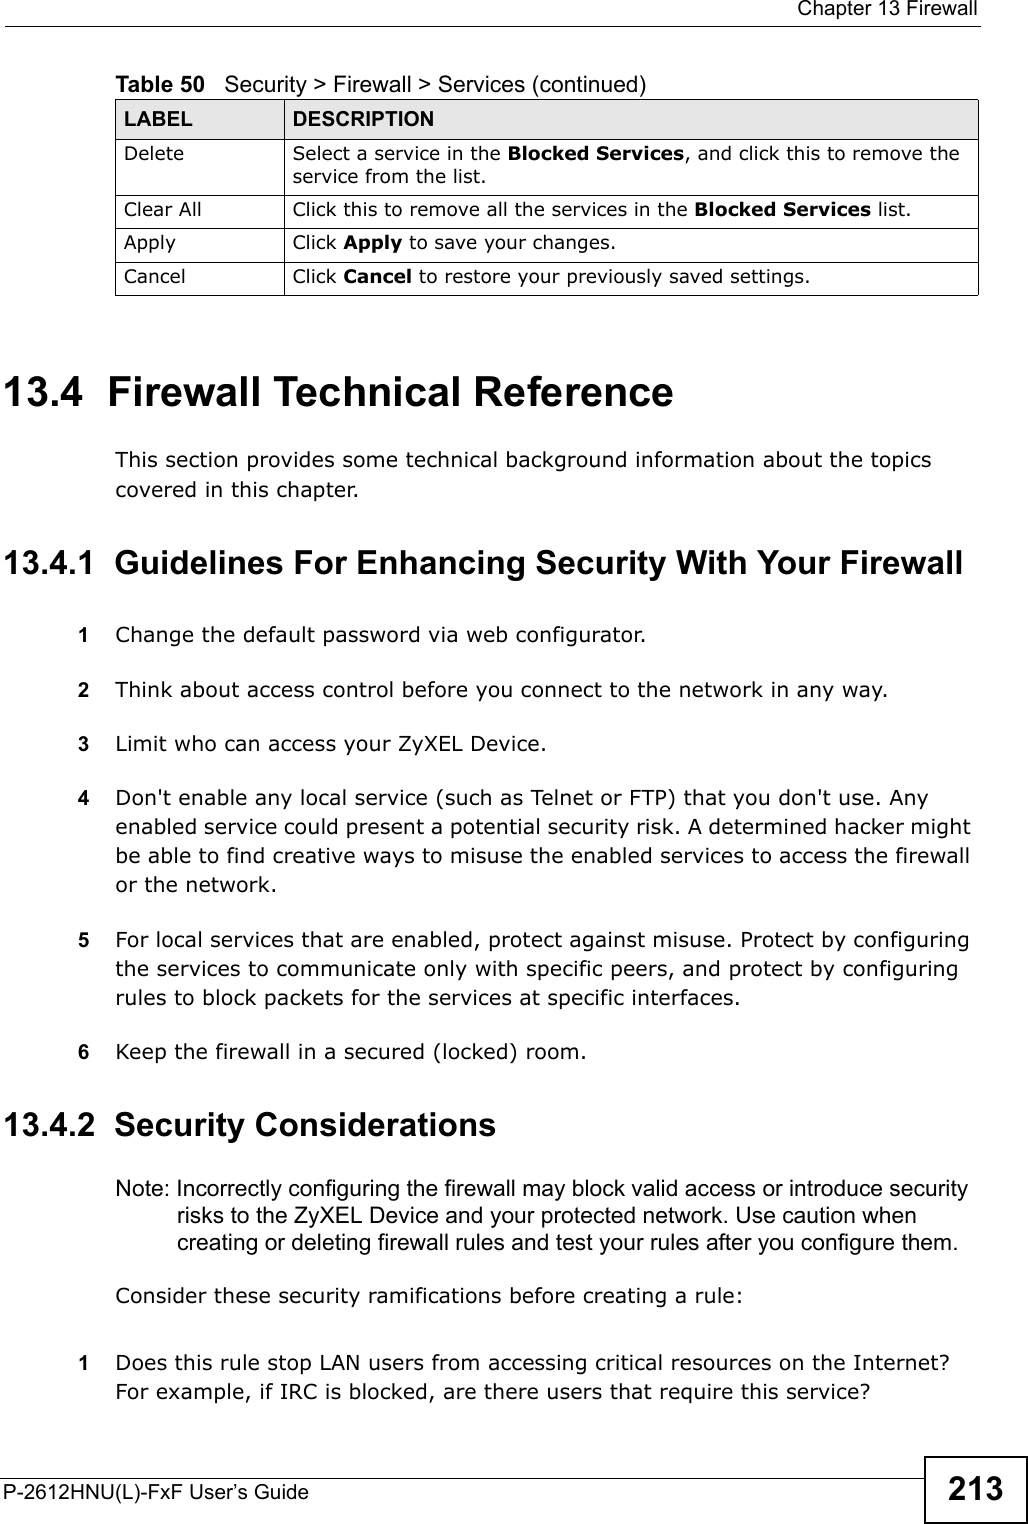  Chapter 13 FirewallP-2612HNU(L)-FxF User’s Guide 21313.4  Firewall Technical ReferenceThis section provides some technical background information about the topics covered in this chapter.13.4.1  Guidelines For Enhancing Security With Your Firewall1Change the default password via web configurator.2Think about access control before you connect to the network in any way.3Limit who can access your ZyXEL Device.4Don&apos;t enable any local service (such as Telnet or FTP) that you don&apos;t use. Any enabled service could present a potential security risk. A determined hacker might be able to find creative ways to misuse the enabled services to access the firewall or the network.5For local services that are enabled, protect against misuse. Protect by configuring the services to communicate only with specific peers, and protect by configuringrules to block packets for the services at specific interfaces.6Keep the firewall in a secured (locked) room.13.4.2  Security ConsiderationsNote: Incorrectly configuring the firewall may block valid access or introduce security risks to the ZyXEL Device and your protected network. Use caution whencreating or deleting firewall rules and test your rules after you configure them.Consider these security ramifications before creating a rule:1Does this rule stop LAN users from accessing critical resources on the Internet?For example, if IRC is blocked, are there users that require this service?Delete Select a service in the Blocked Services, and click this to remove theservice from the list.Clear All Click this to remove all the services in the Blocked Services list.Apply Click Apply to save your changes.Cancel Click Cancel to restore your previously saved settings.Table 50   Security &gt; Firewall &gt; Services (continued)LABEL DESCRIPTION